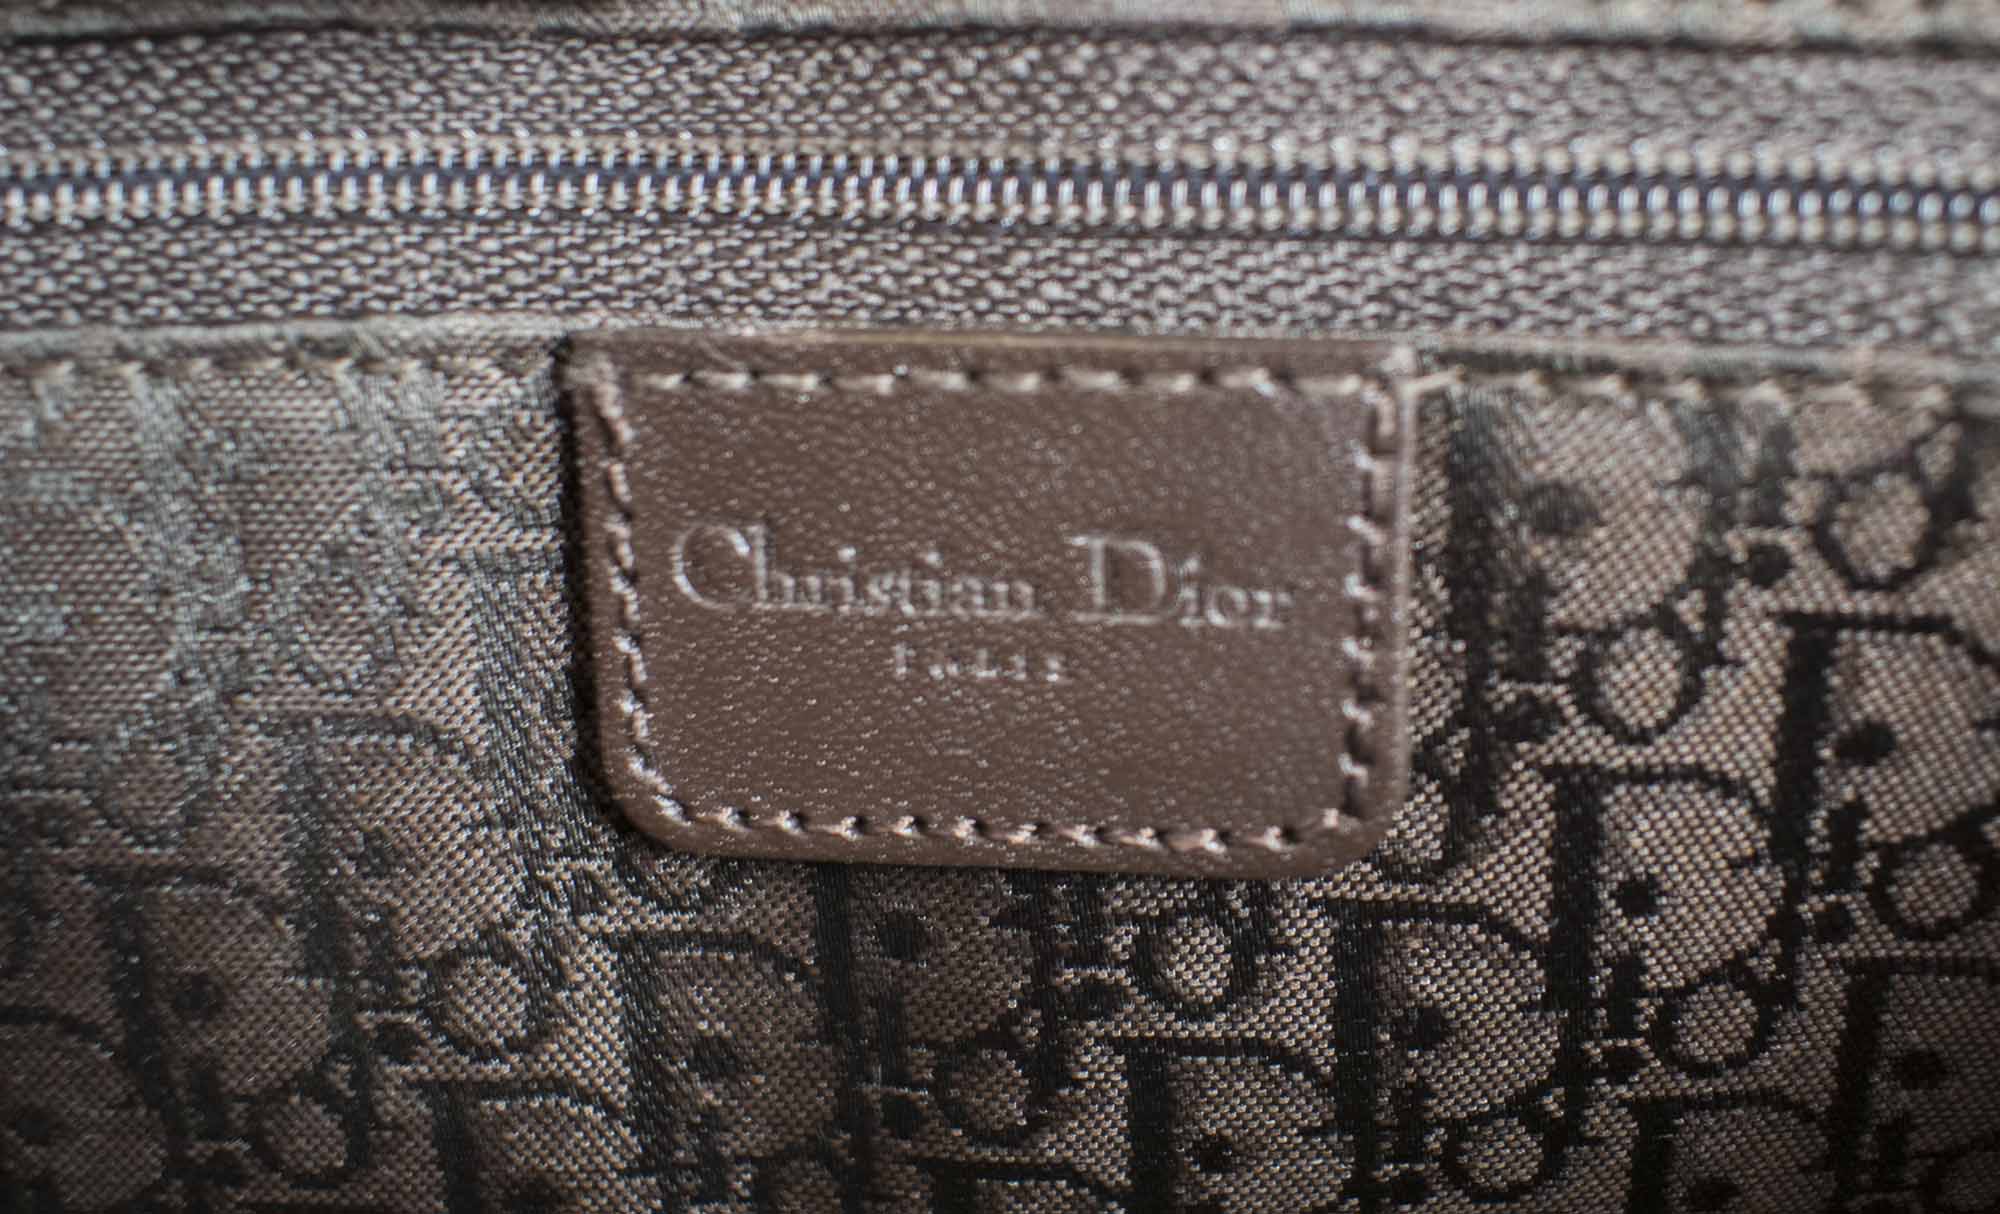 CHRISTIAN DIOR STREET CHIC COLUMBUS BAG brown leather with brown monogram  fabric lining multipockets outside leather shoulder top handle bottom  feet frontal flap closure 30cm excluding pockets x 14cm H x 10cm